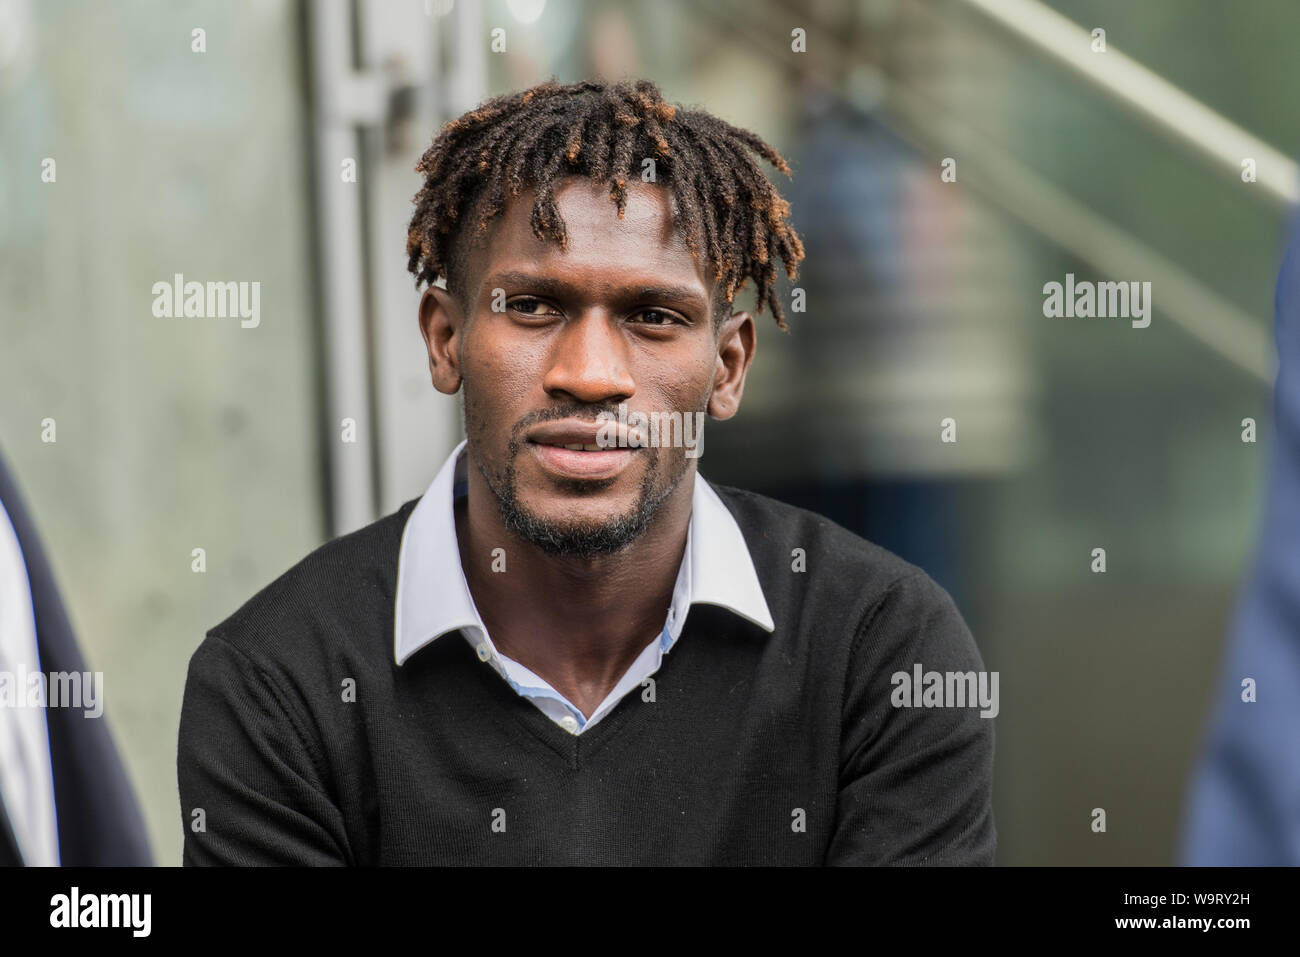 Frankfurt, Germany. 15th Aug, 2019. Bakery Jatta (Hamburger SV) sits on the  DFB grounds on a wall between HSV representatives. Bakery Jatta is  suspected of having given false information about his name